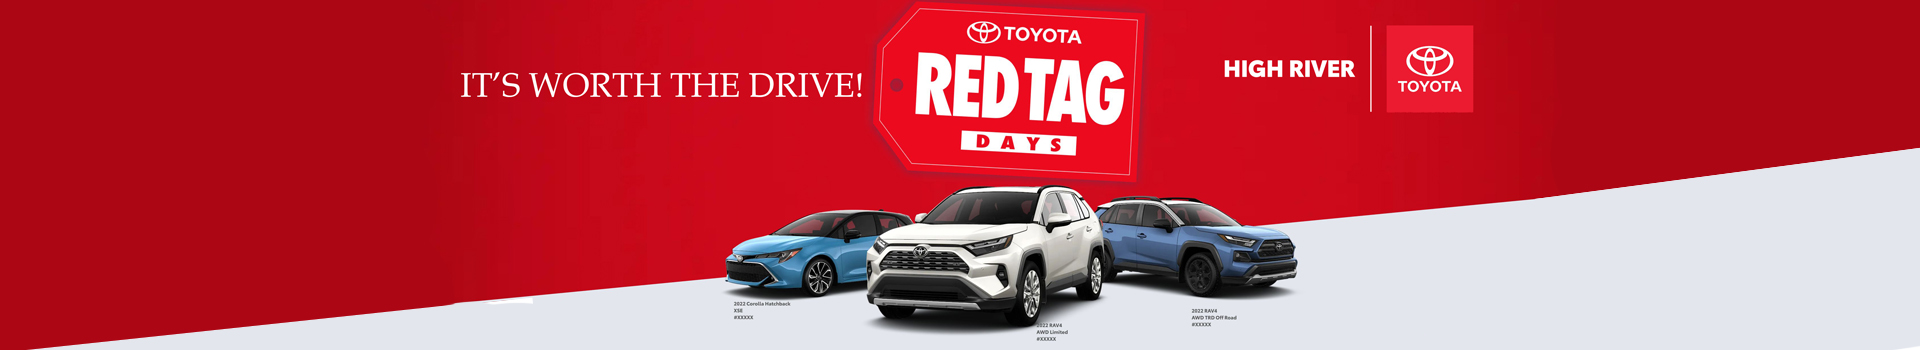 Red Tag Days at High River Toyota